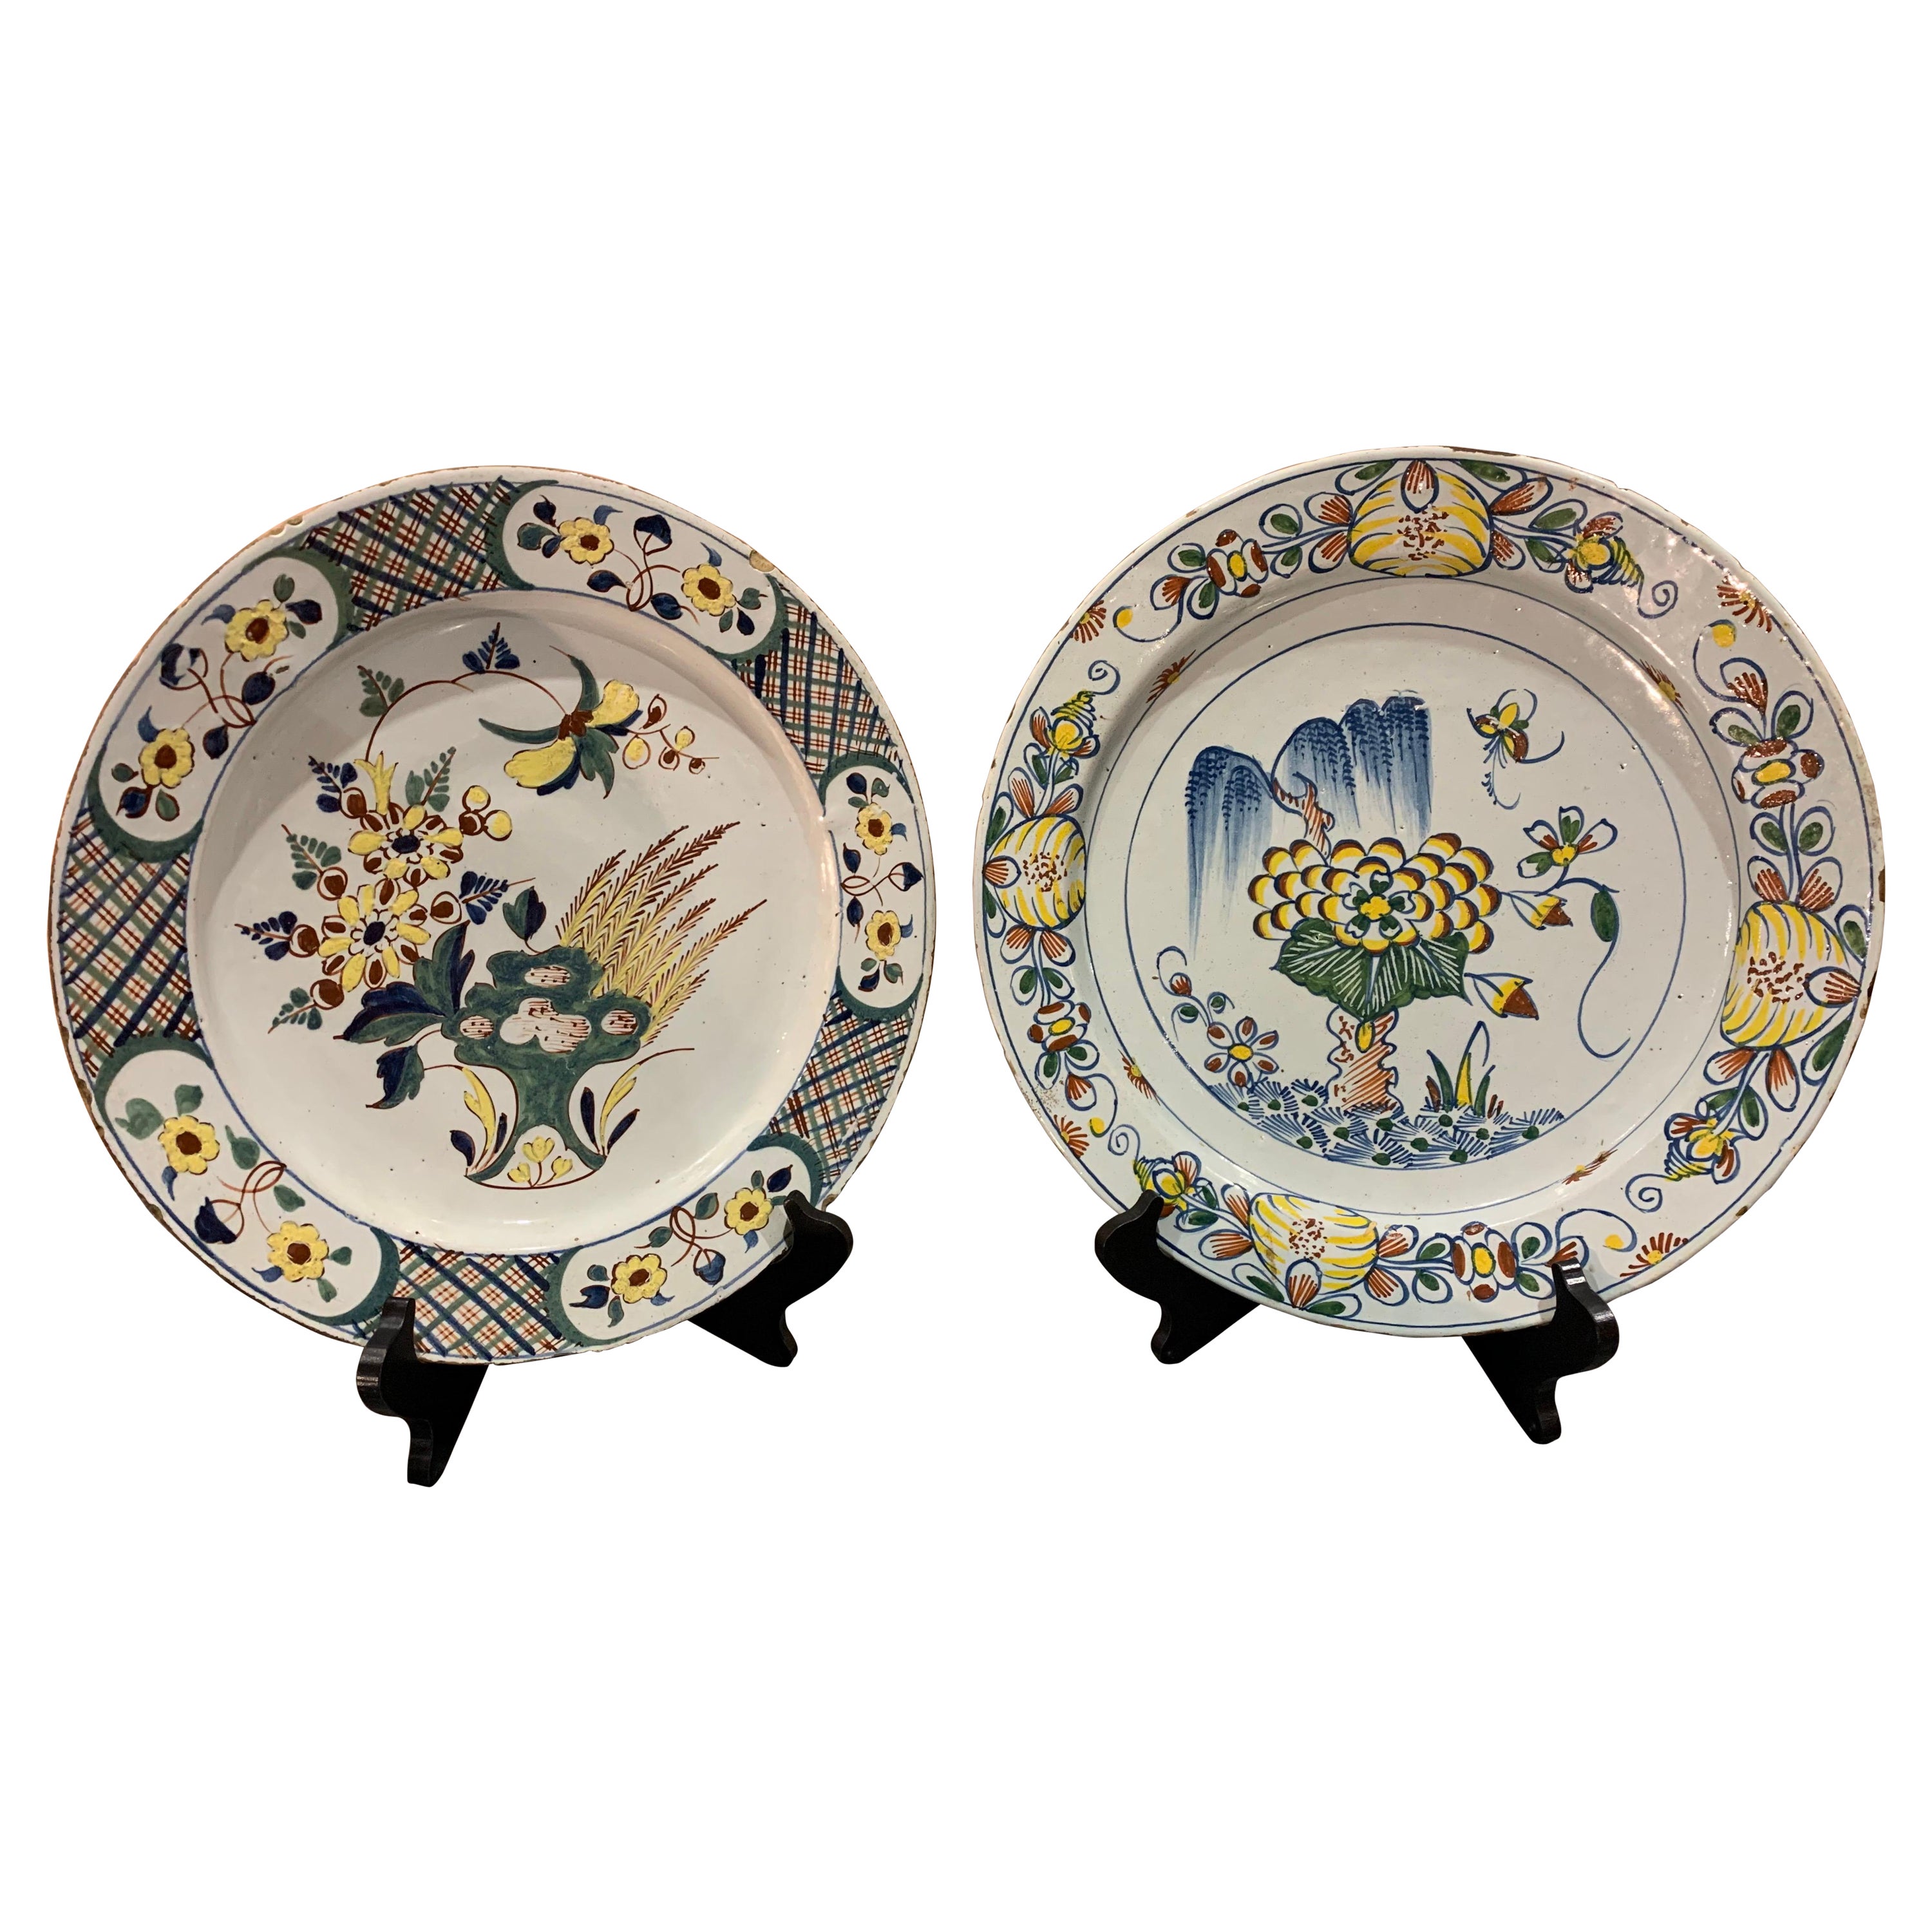 Near Pair of 18th Century English Polychrome Delft Chargers For Sale